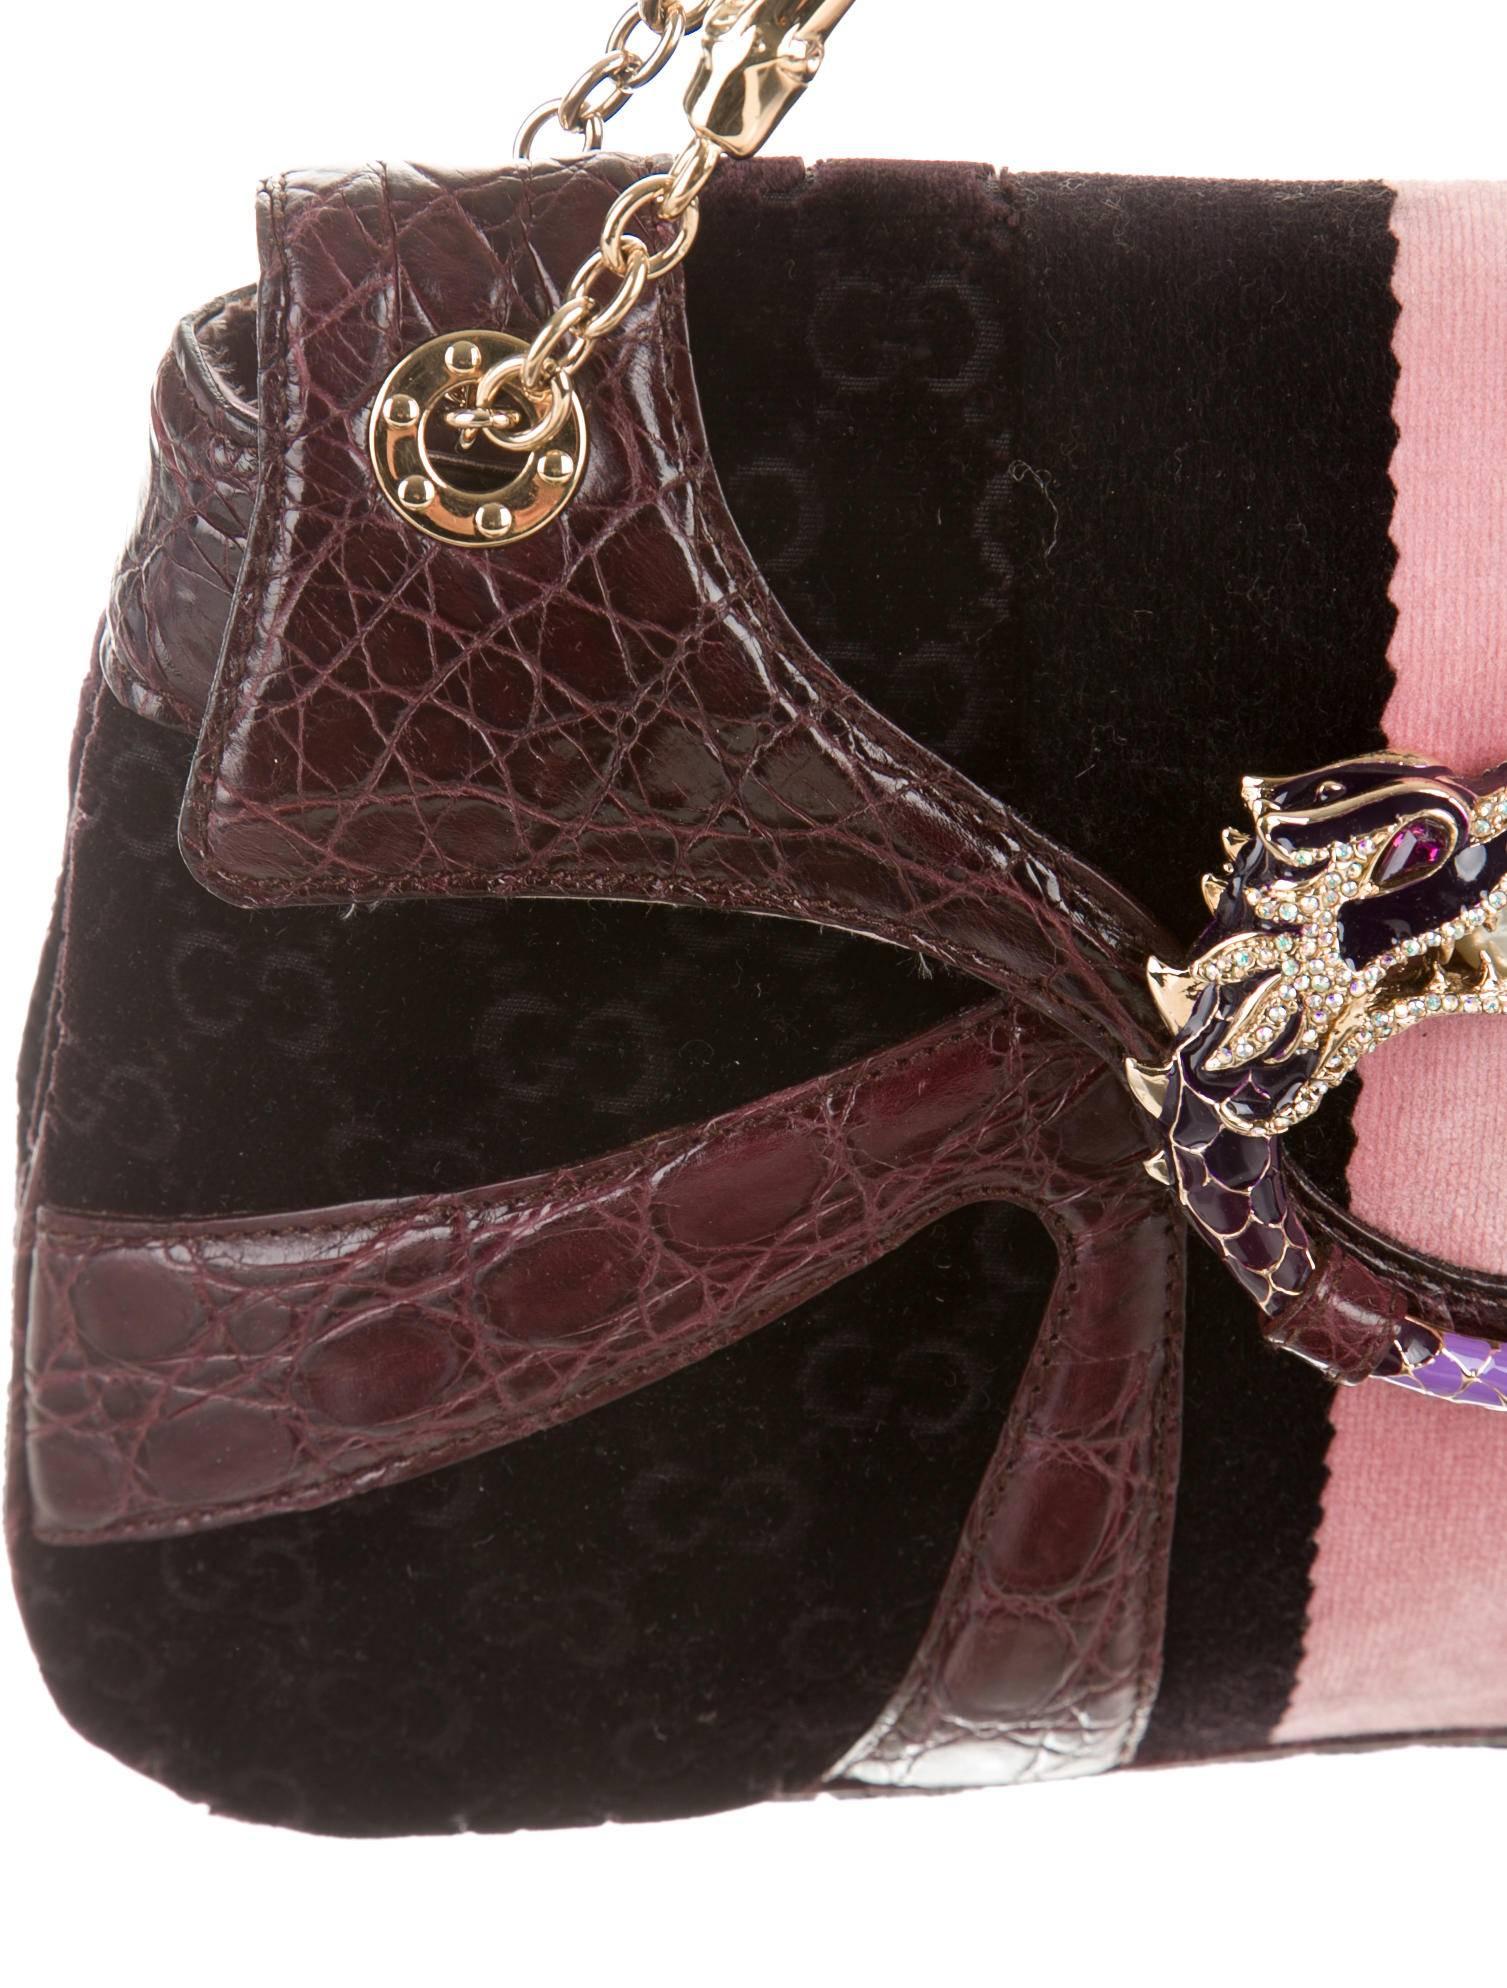 CURATOR'S NOTES

WOW! LIMITED TIME PRICE REDUCTION!

Amazing limited edition and rare Gucci velvet, crocodile and crystal flap chain shoulder bag.  Hailing from the Tom Ford for Gucci era, this amazing bag boasts  a crystal-encrusted dragon